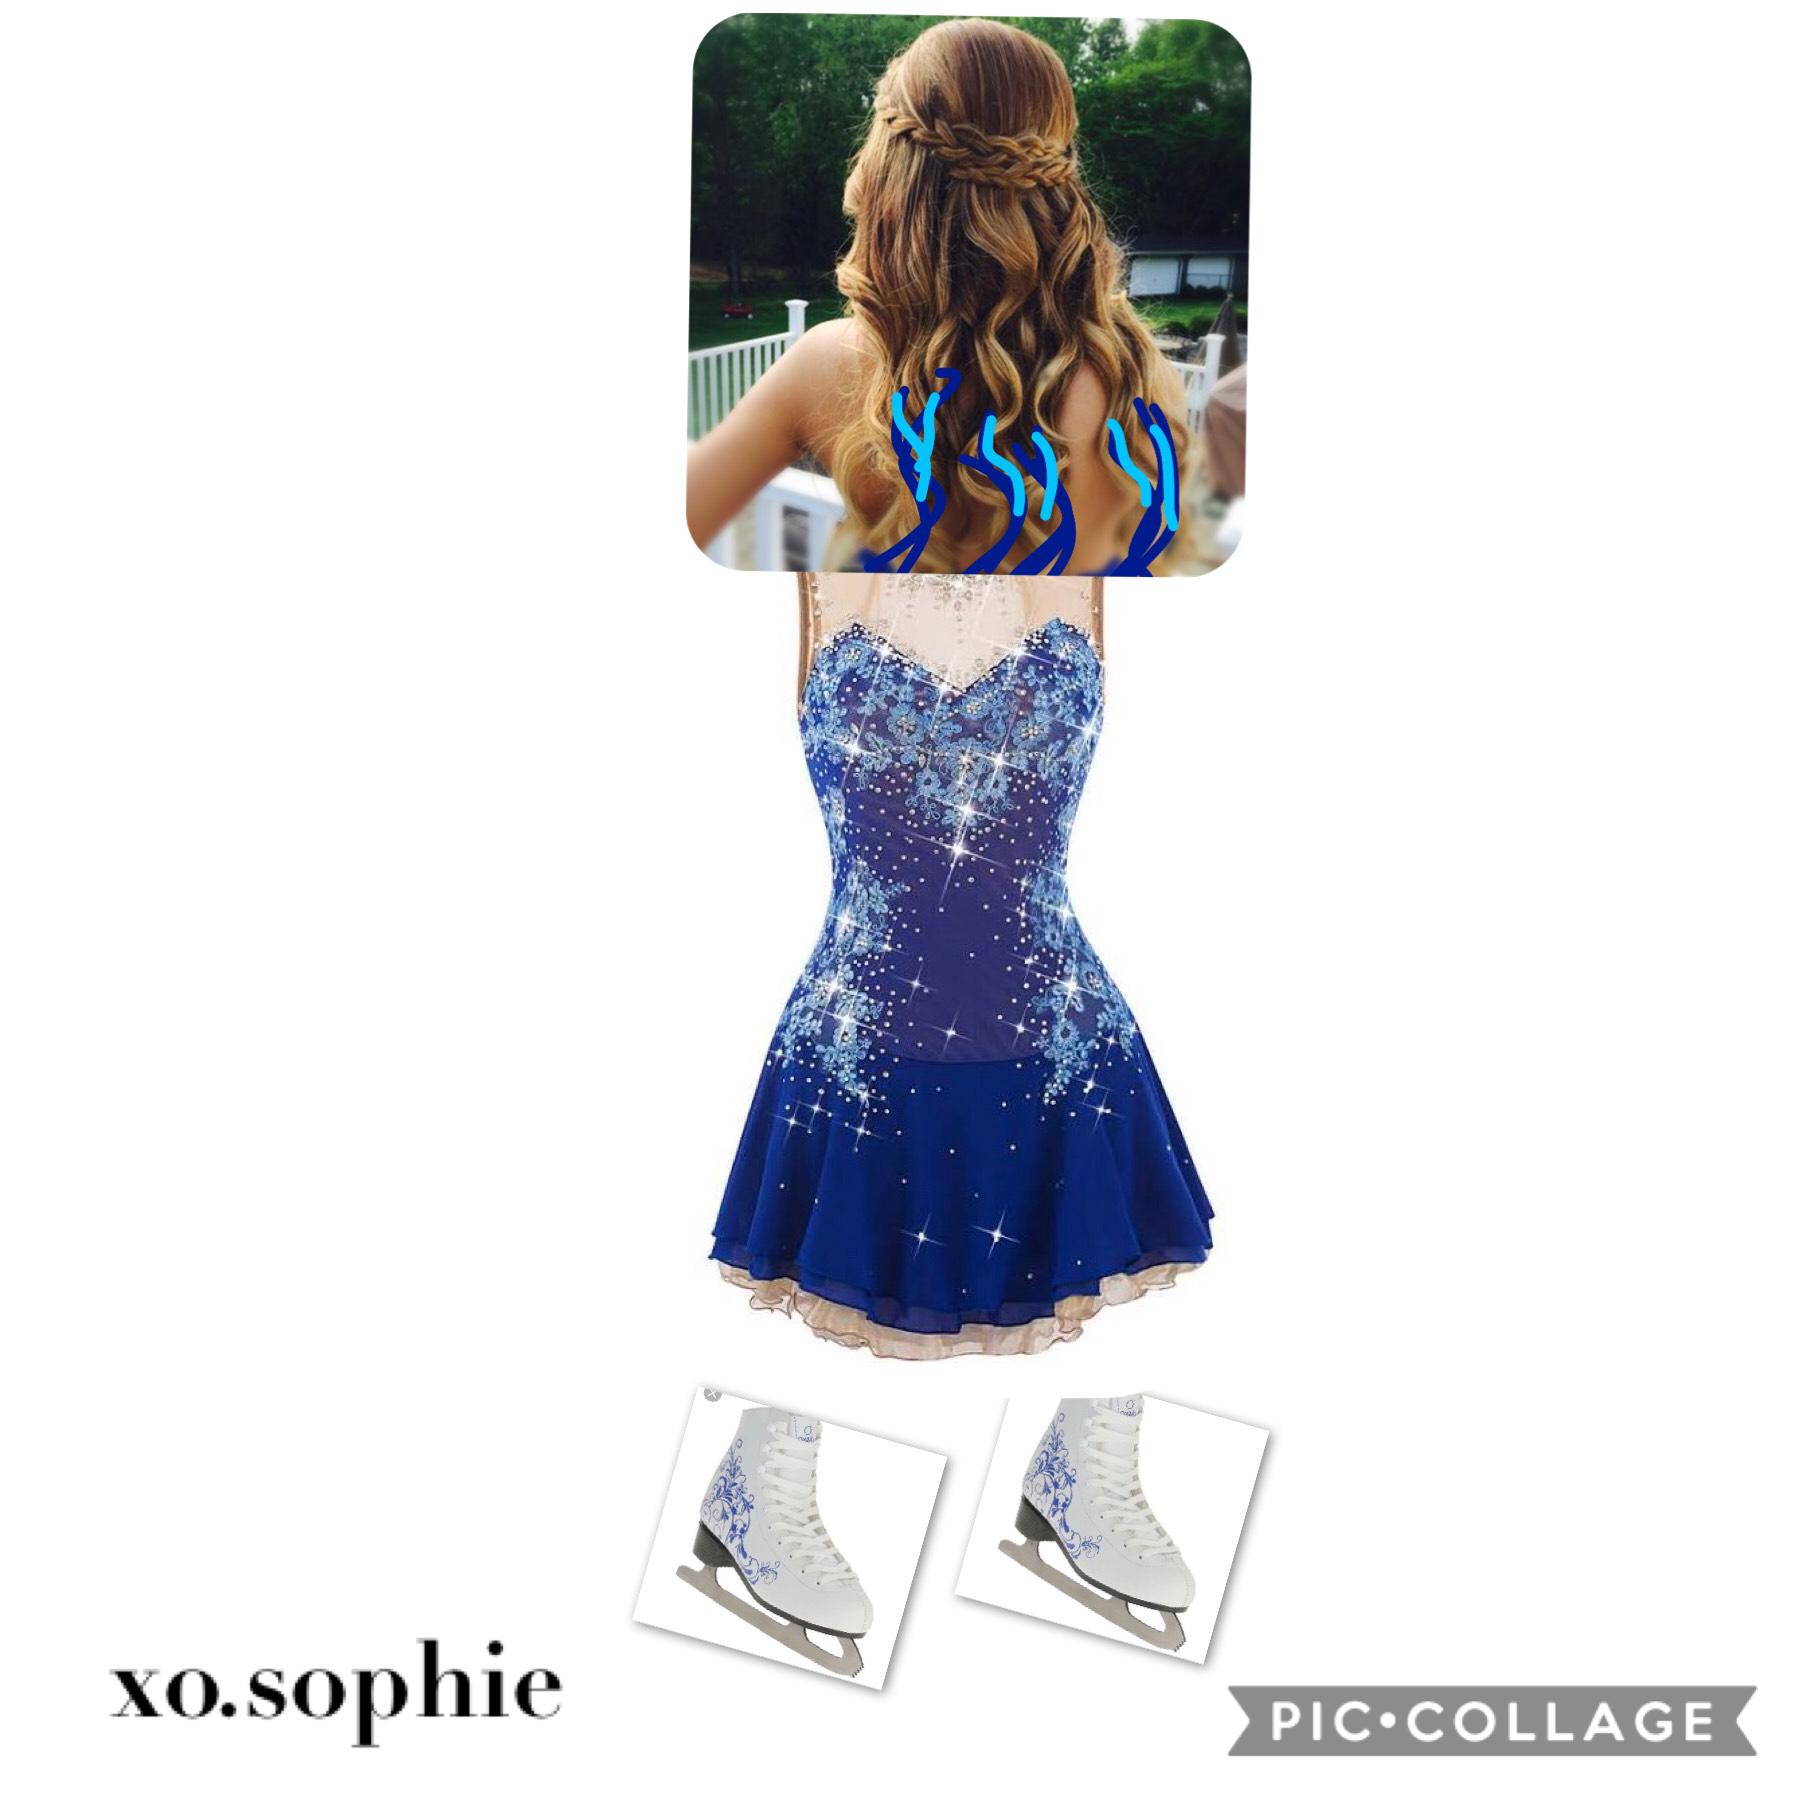 What do you guys think of this ice skating outfit! -Sophie ❤️